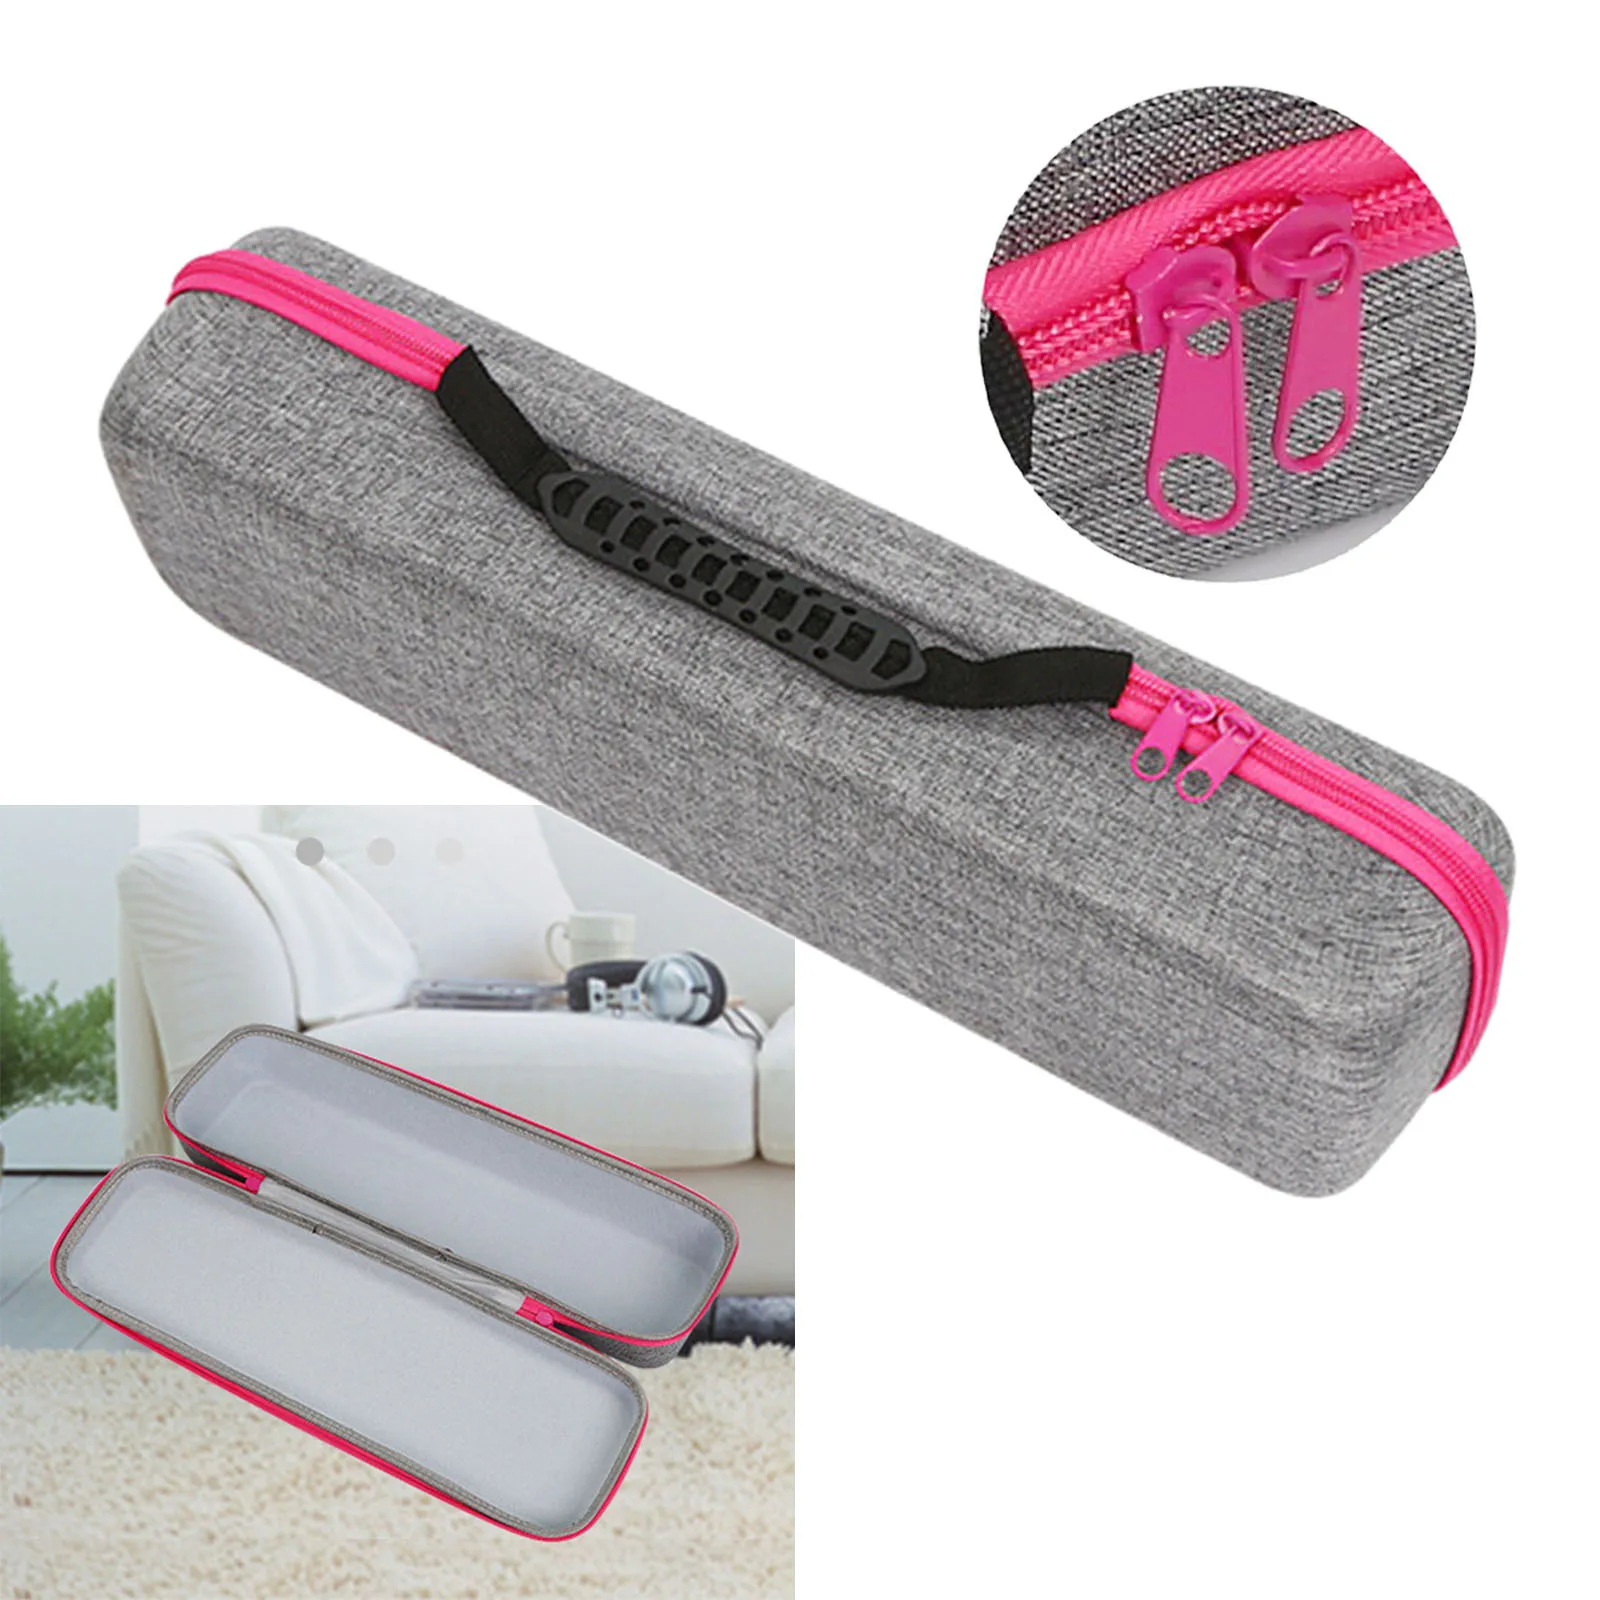 Hair Straightener Storage Bag Professional Portable Carrying Bag for Styler